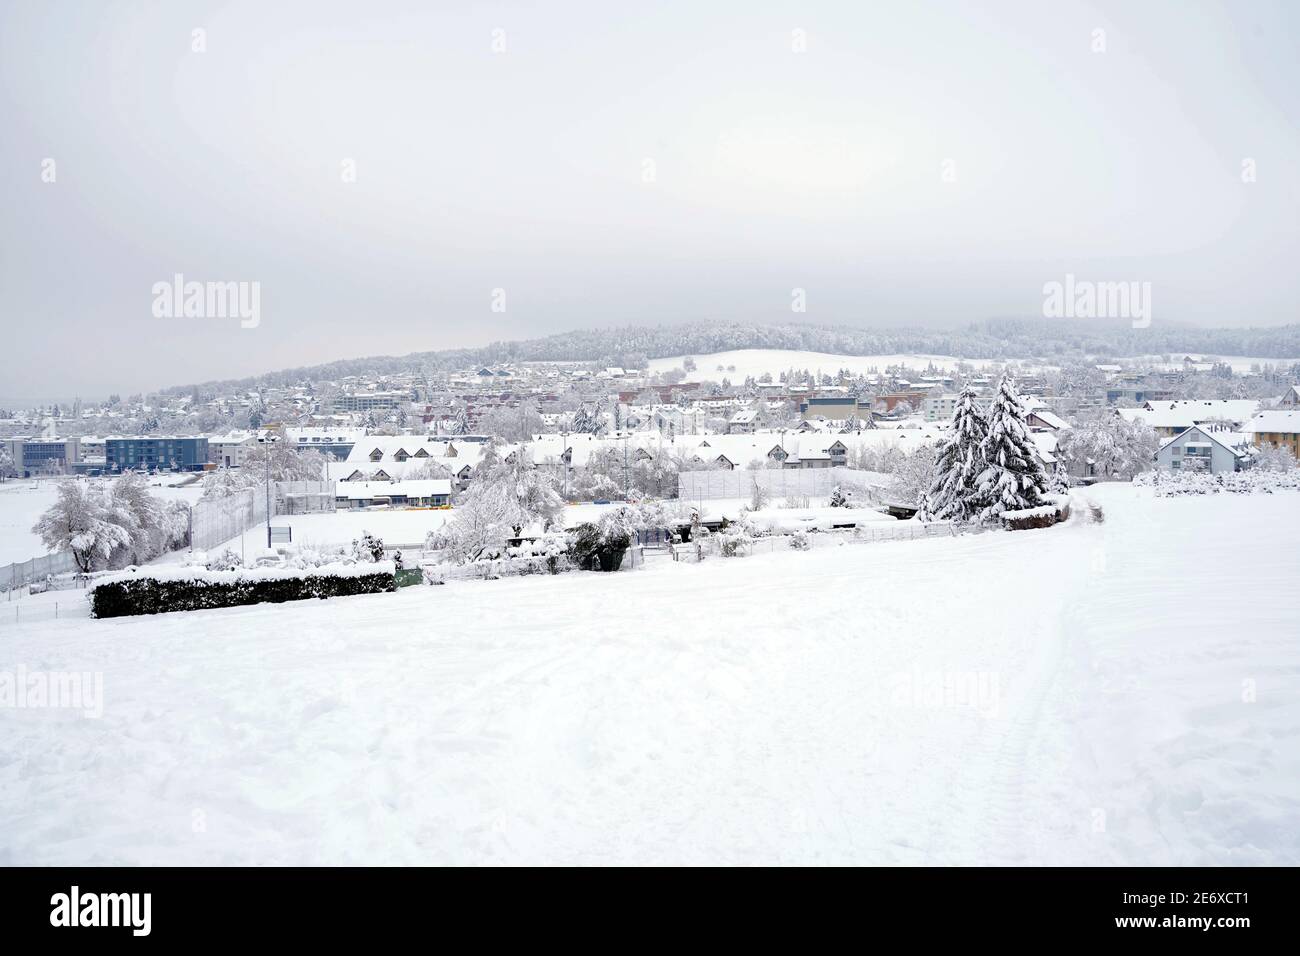 Panoramic view of village Urdorf in Switzerland in winter. It is covered with snow in extreme snowfall in January 2021. Stock Photo